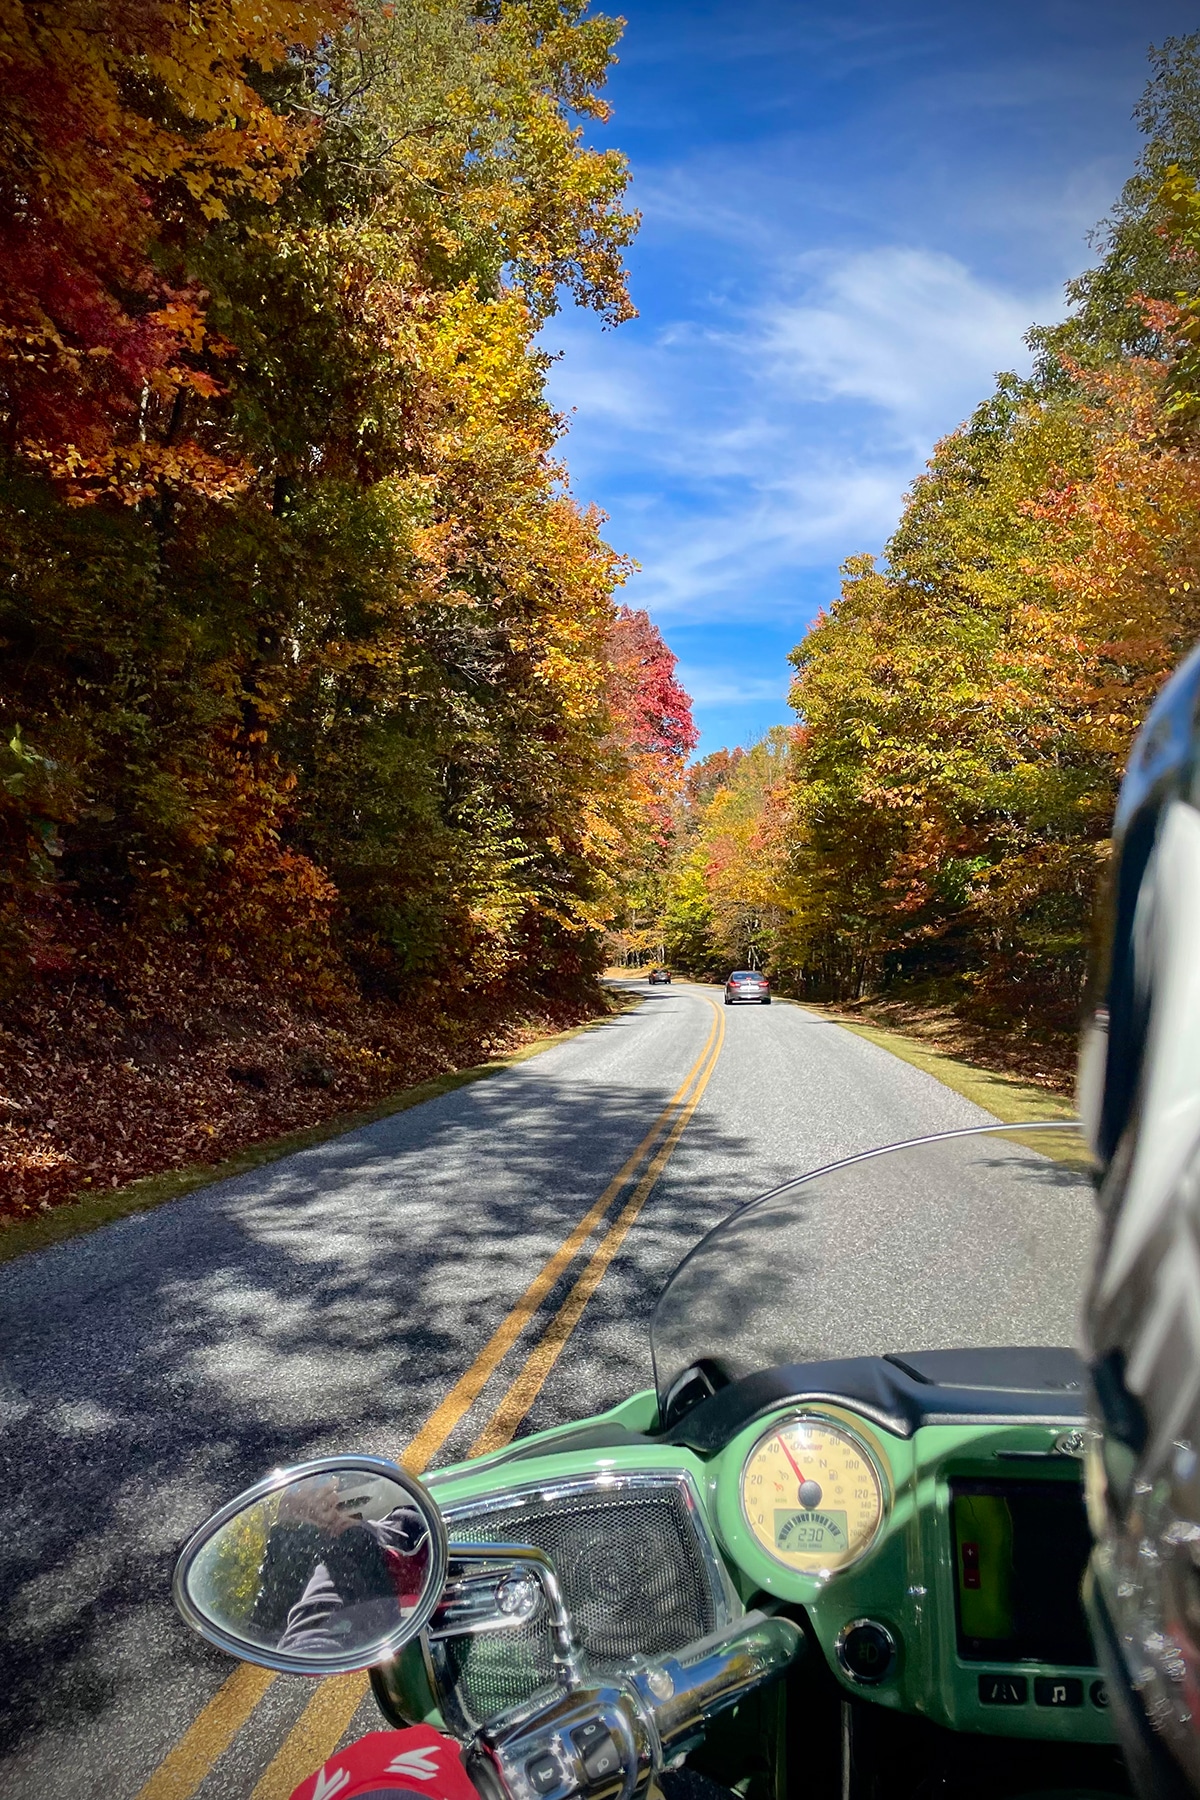 A stretch of the Blue Ridge Parkway in North Carolina during October that shows the leaves changing.